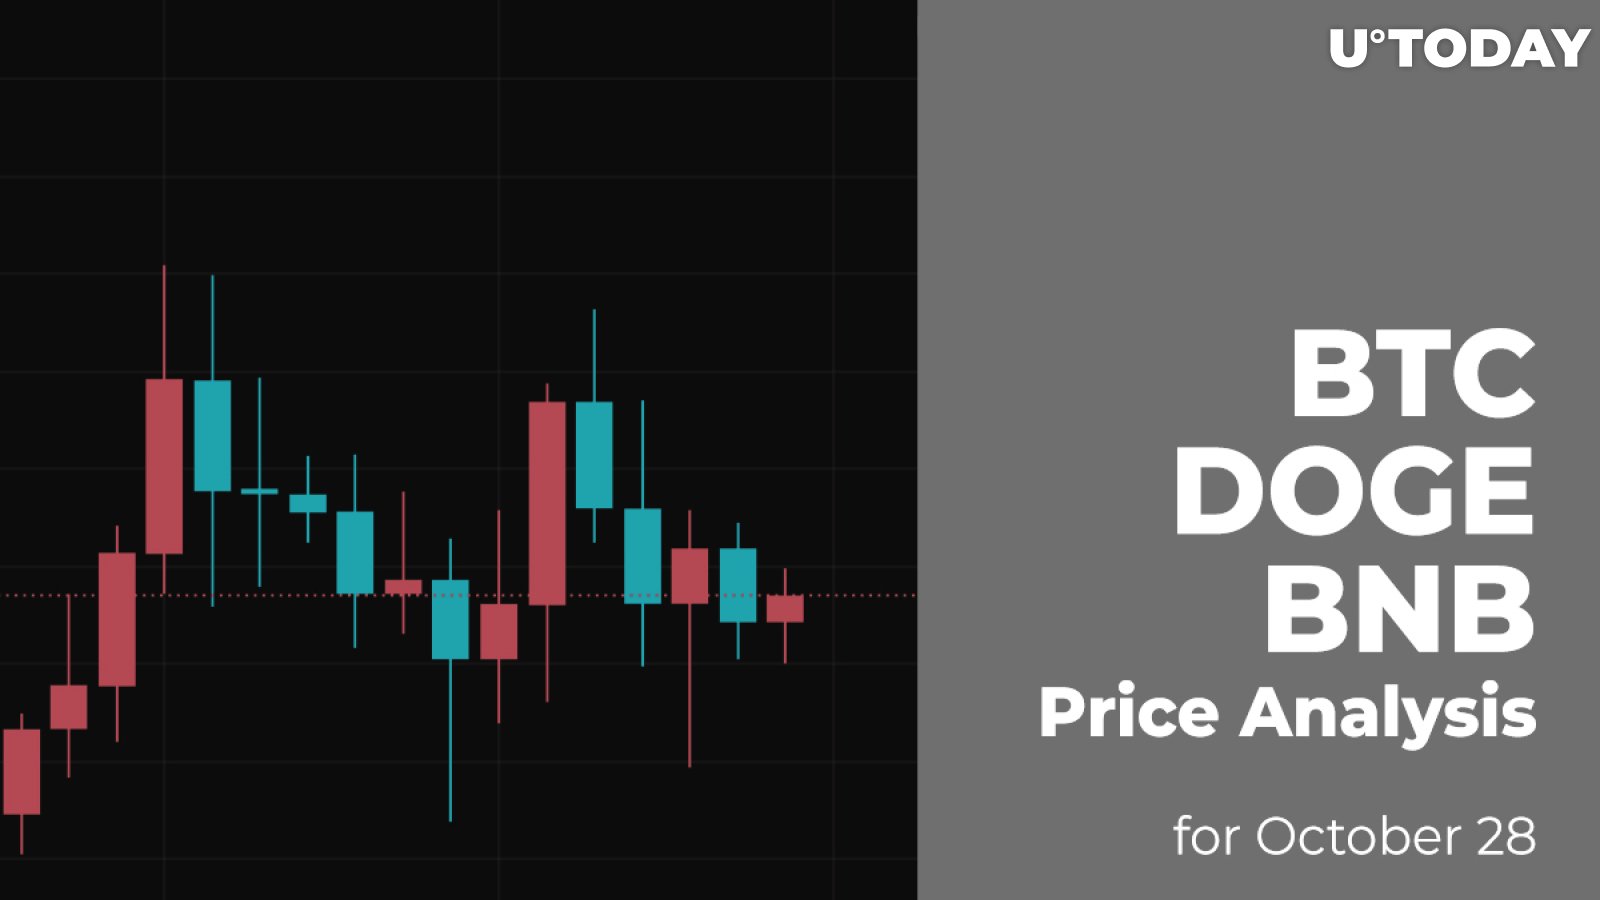 BTC, DOGE and BNB Price Analysis for October 28